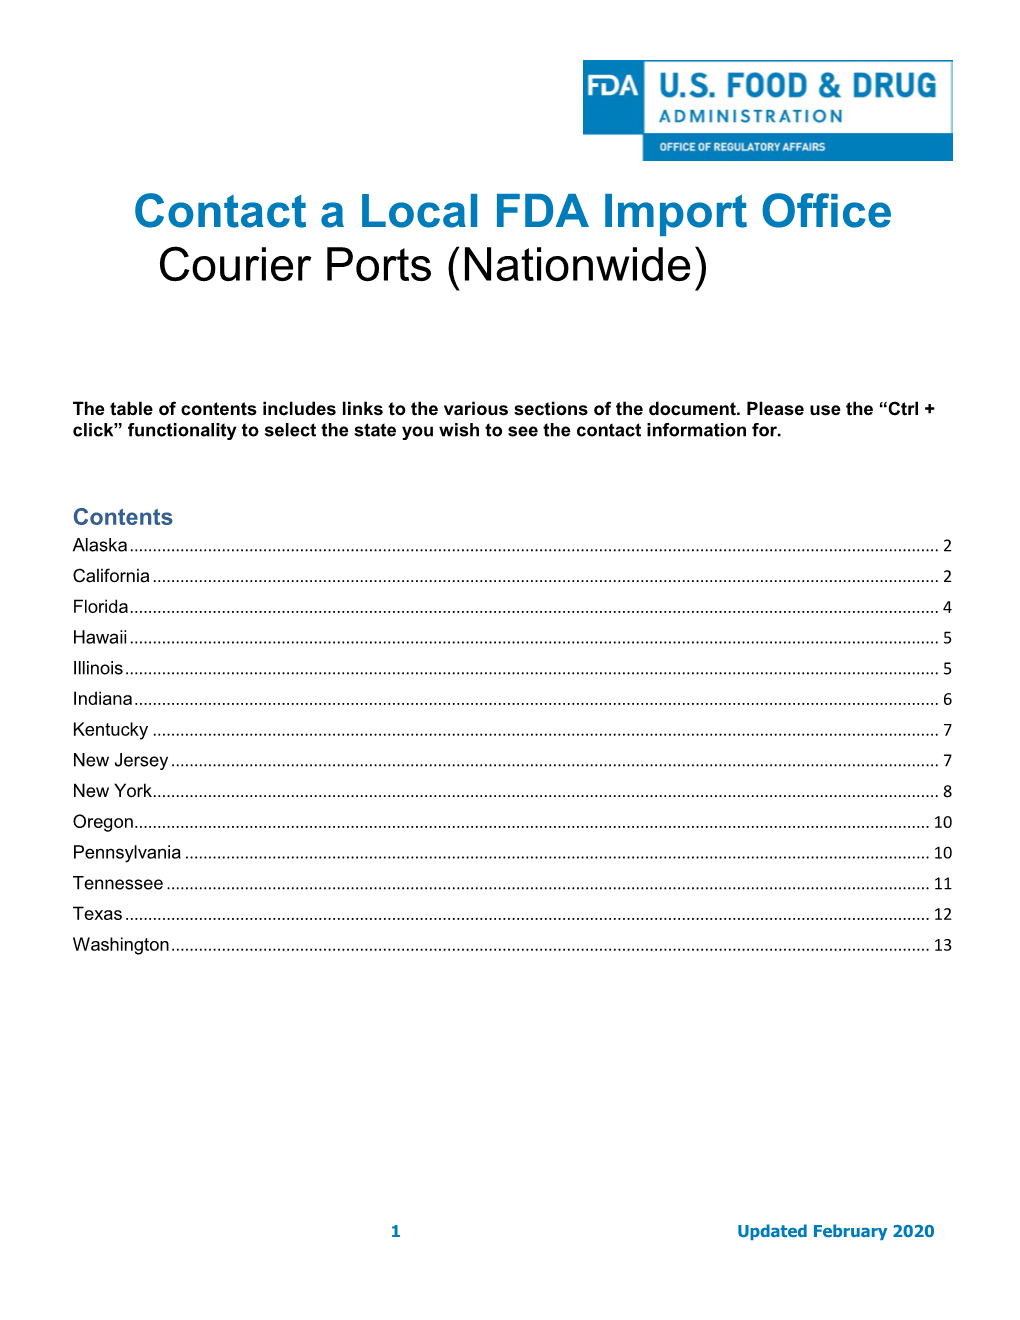 Contact a Local FDA Import Office Courier Ports (Nationwide)